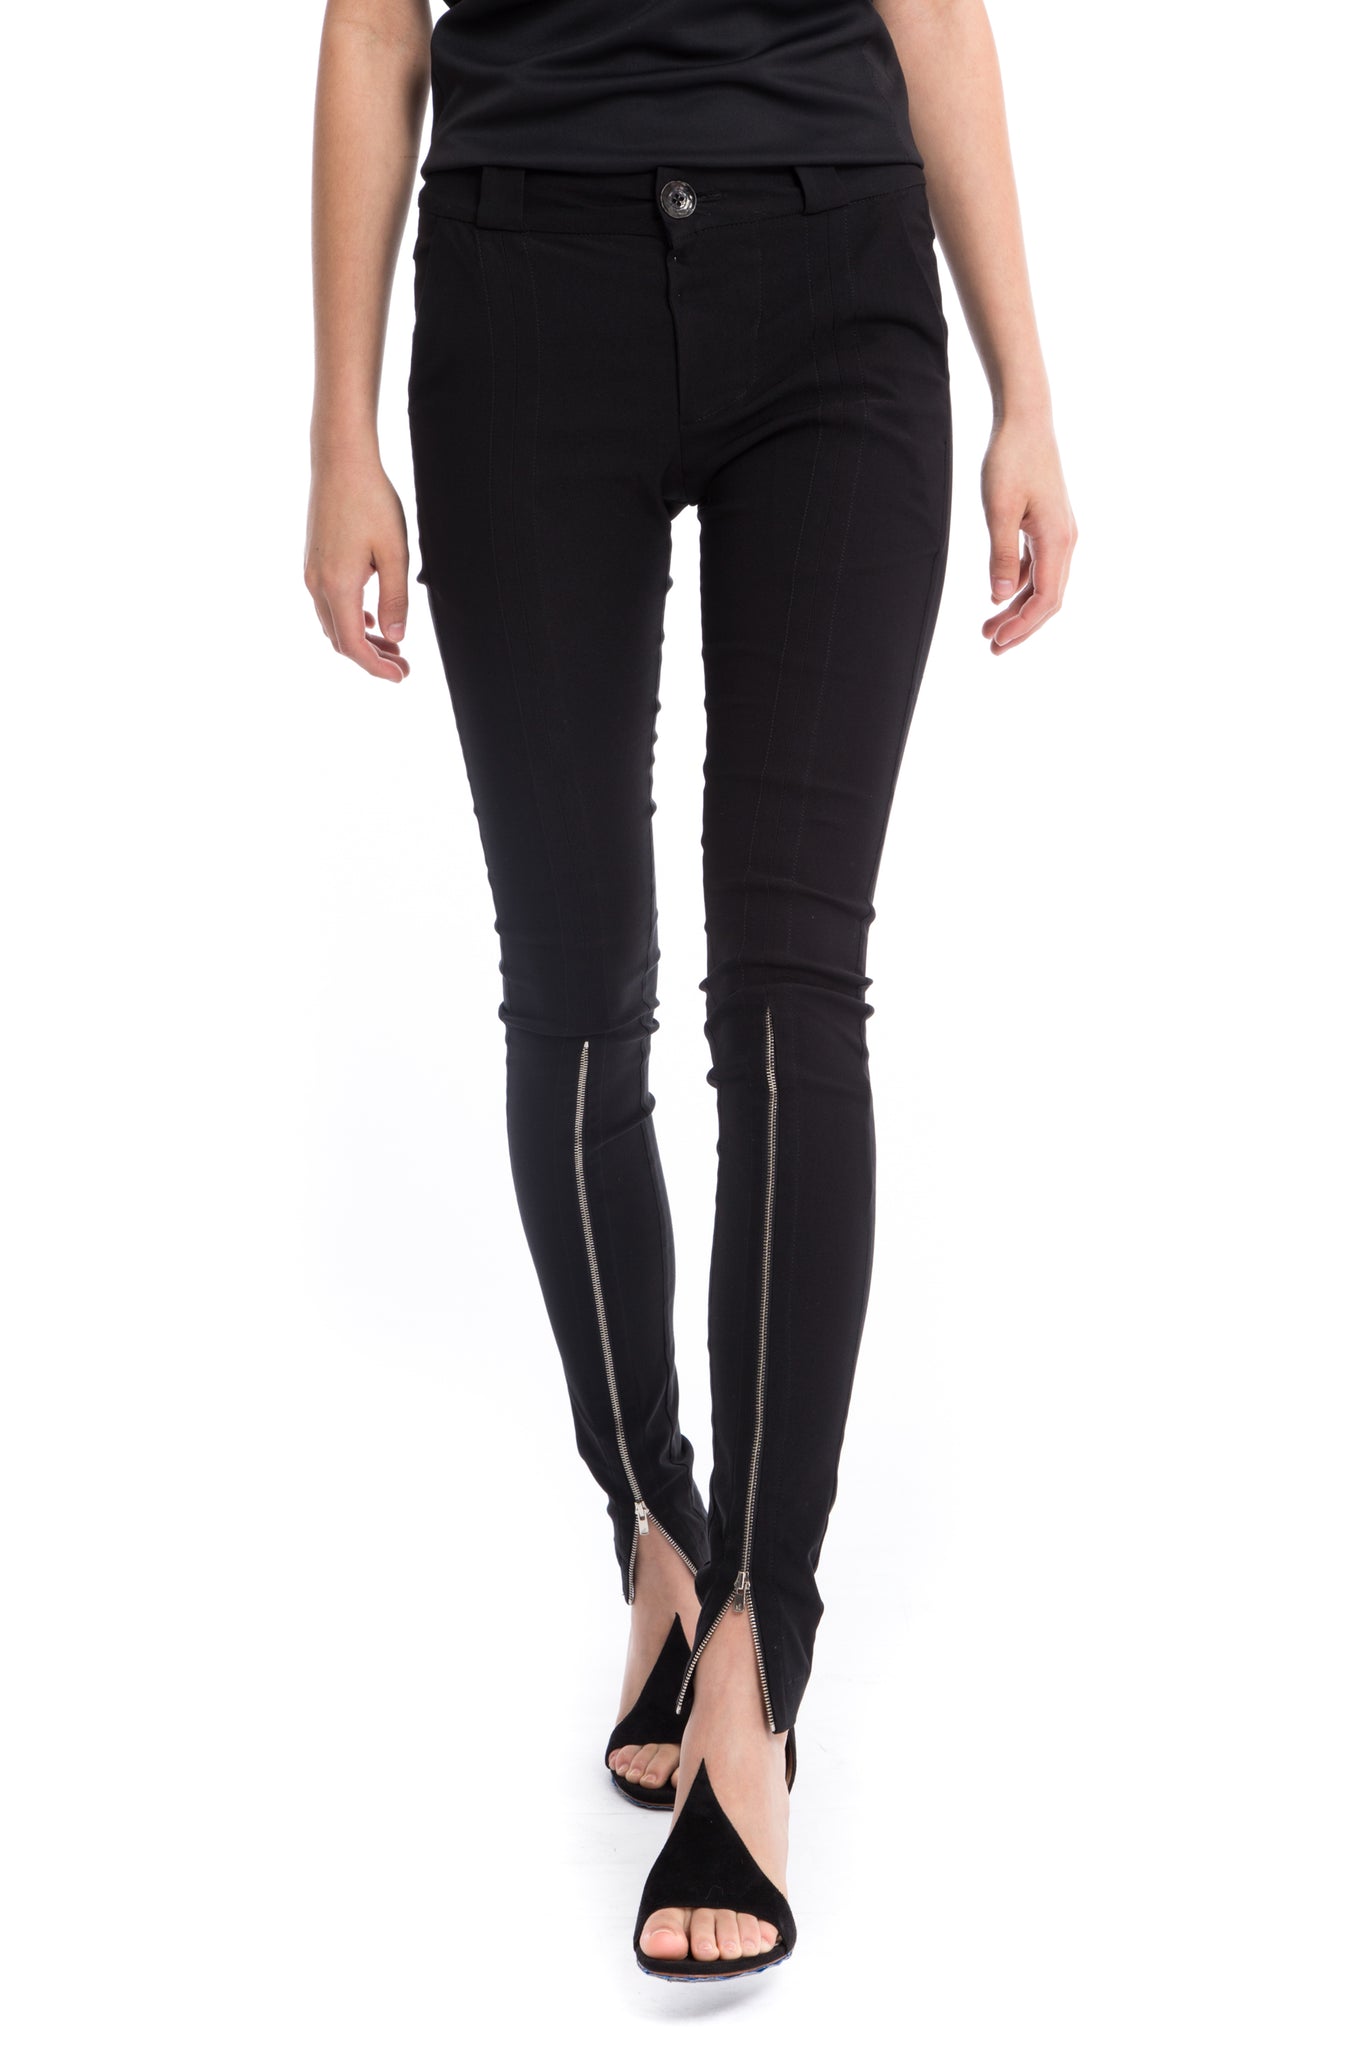 NINObrand black skinny Pants with front silver long zippers